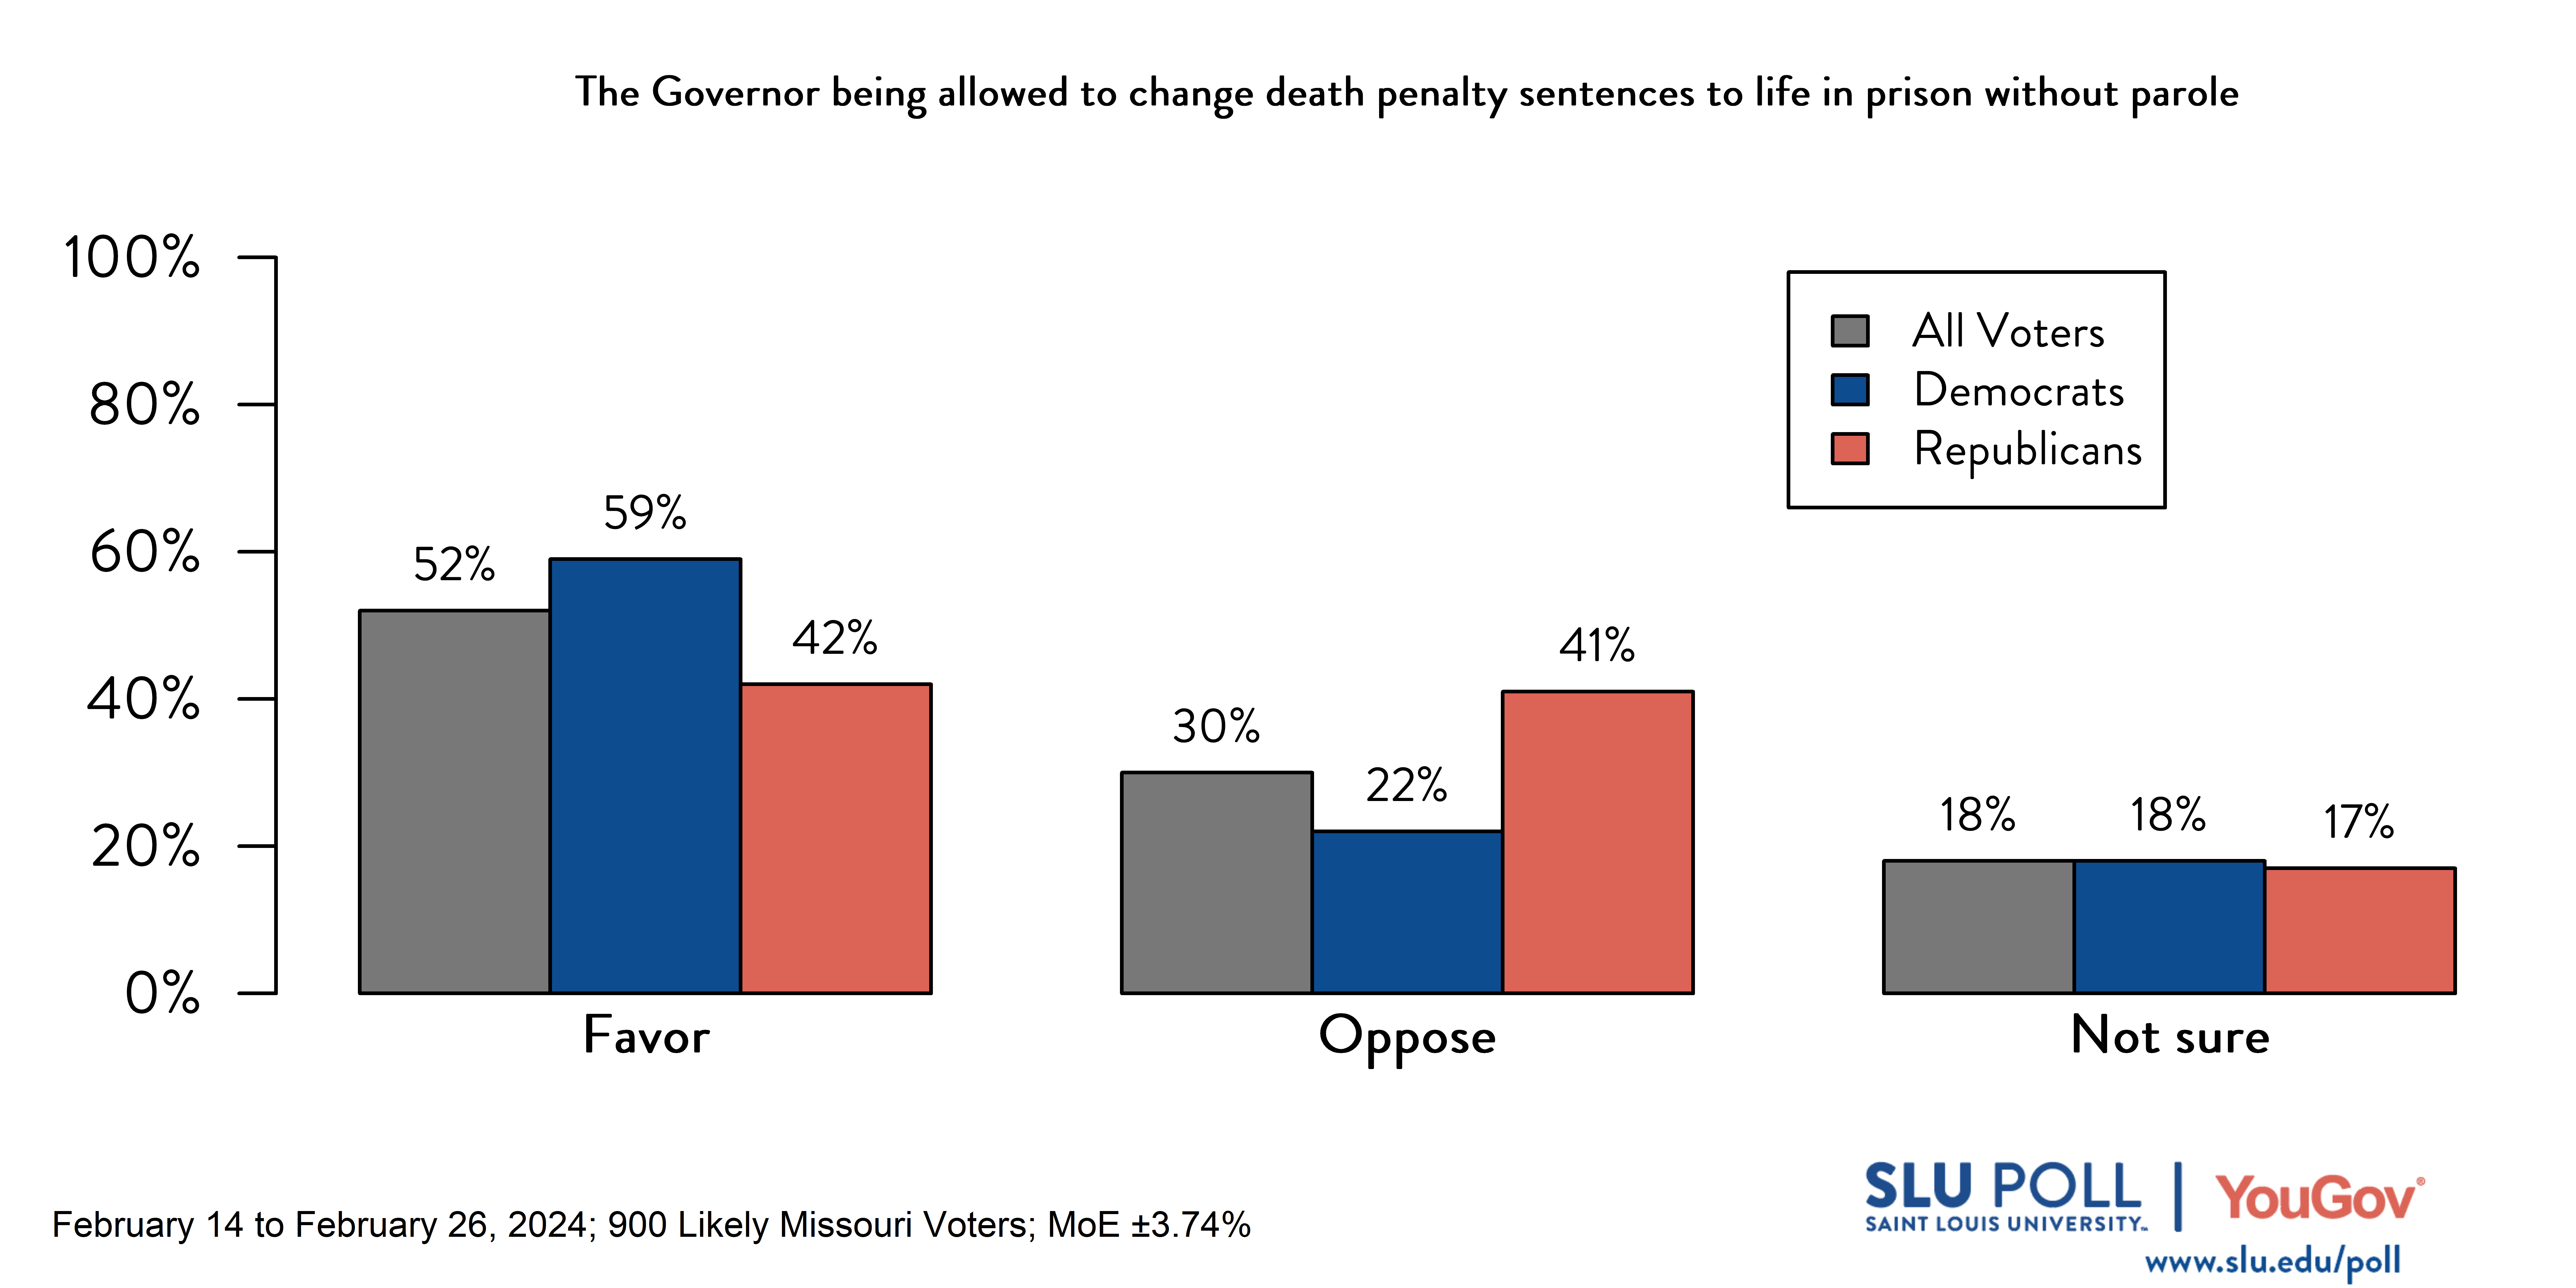 SLU/YouGov Poll results for death penalty commutations question. Results listed in caption